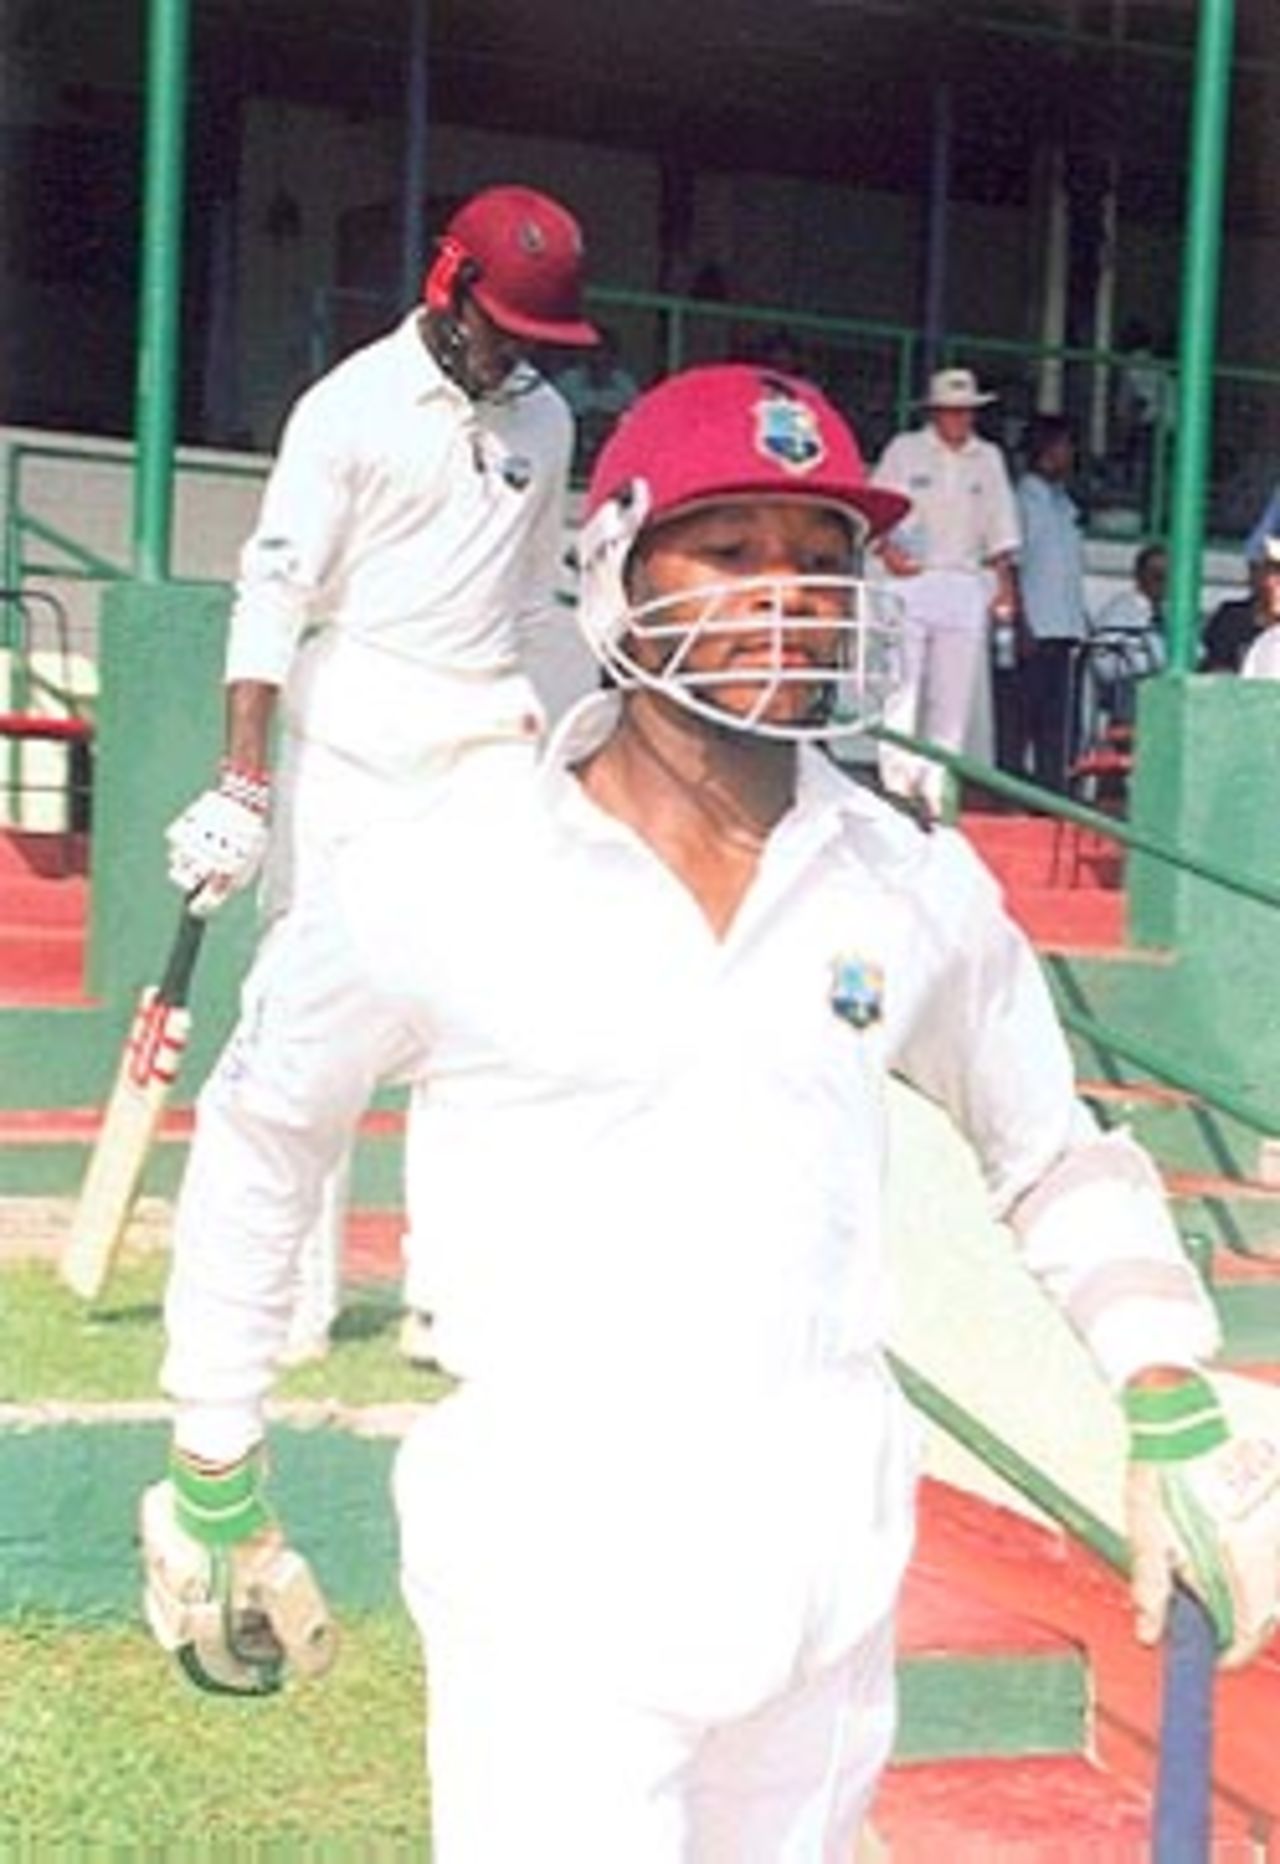 Pinch hitter Calitos Lopez walks out with Brenton Parchment to take on the Kiwis, Under-19s World Cup, 1999/00, Super League Group 1,New Zealand Under-19s v West Indies Under-19s, Nondescripts Cricket Club Ground, Colombo, 20 January 2000